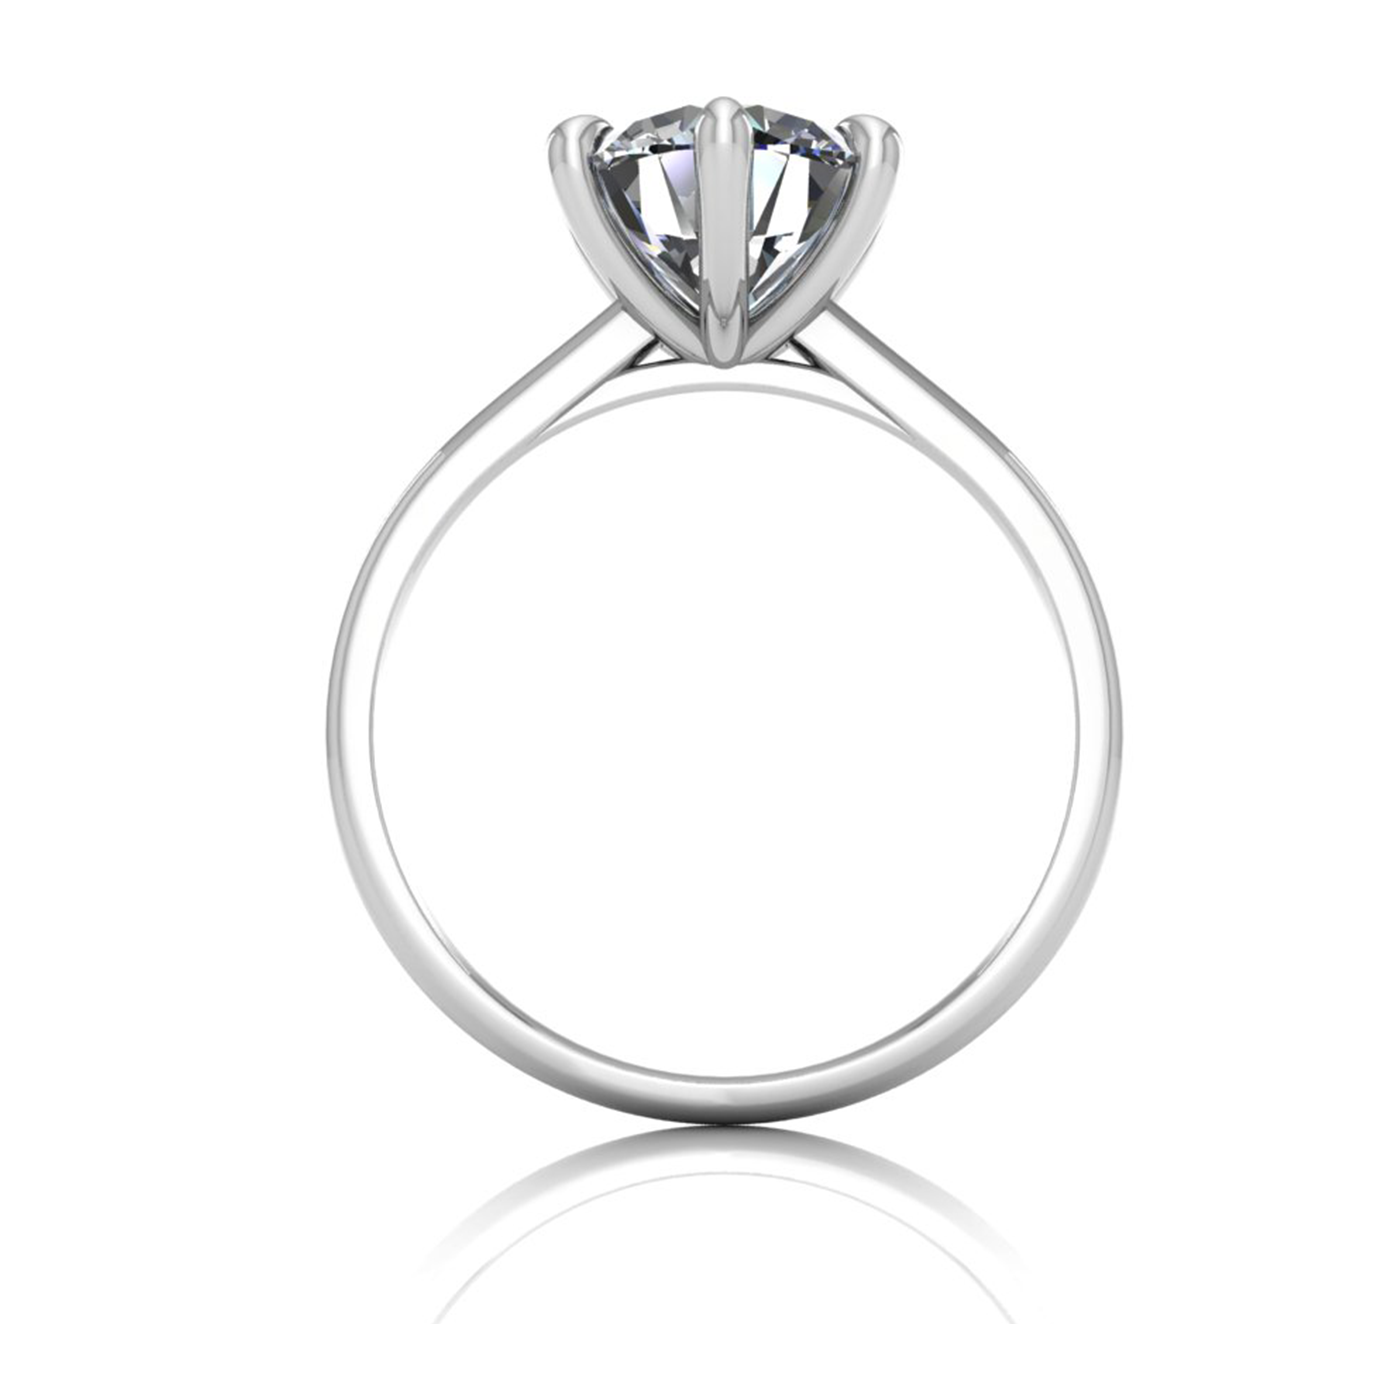 18k white gold  2,00 ct 6 prongs solitaire round cut diamond engagement ring with whisper thin band